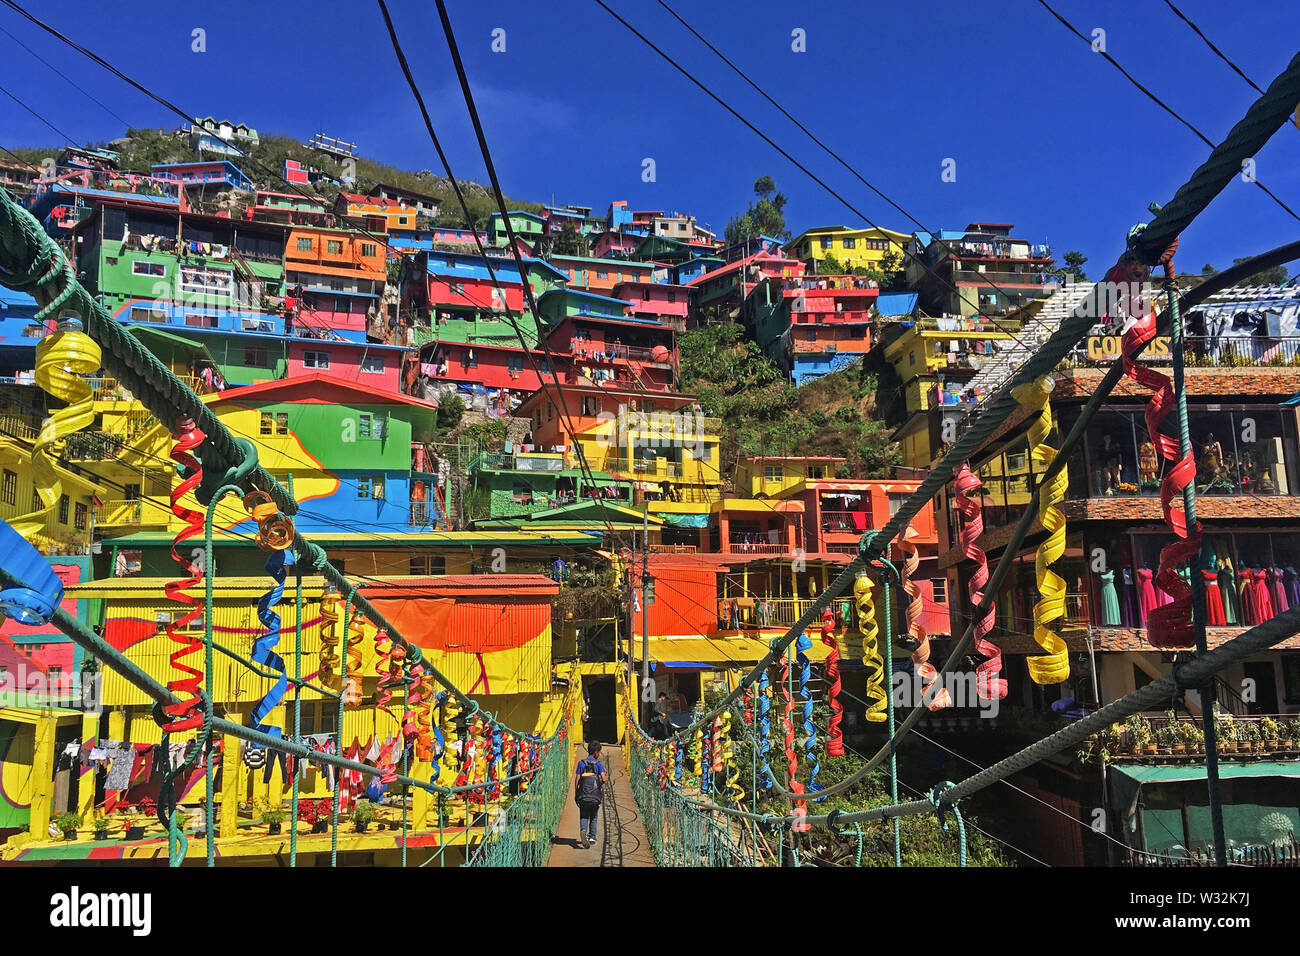 The Colors of StBoSa or the StoBoSa Hillside Homes Artwork, a community designed artwork by the Tam-awan village group, is a tourist destination. Stock Photo